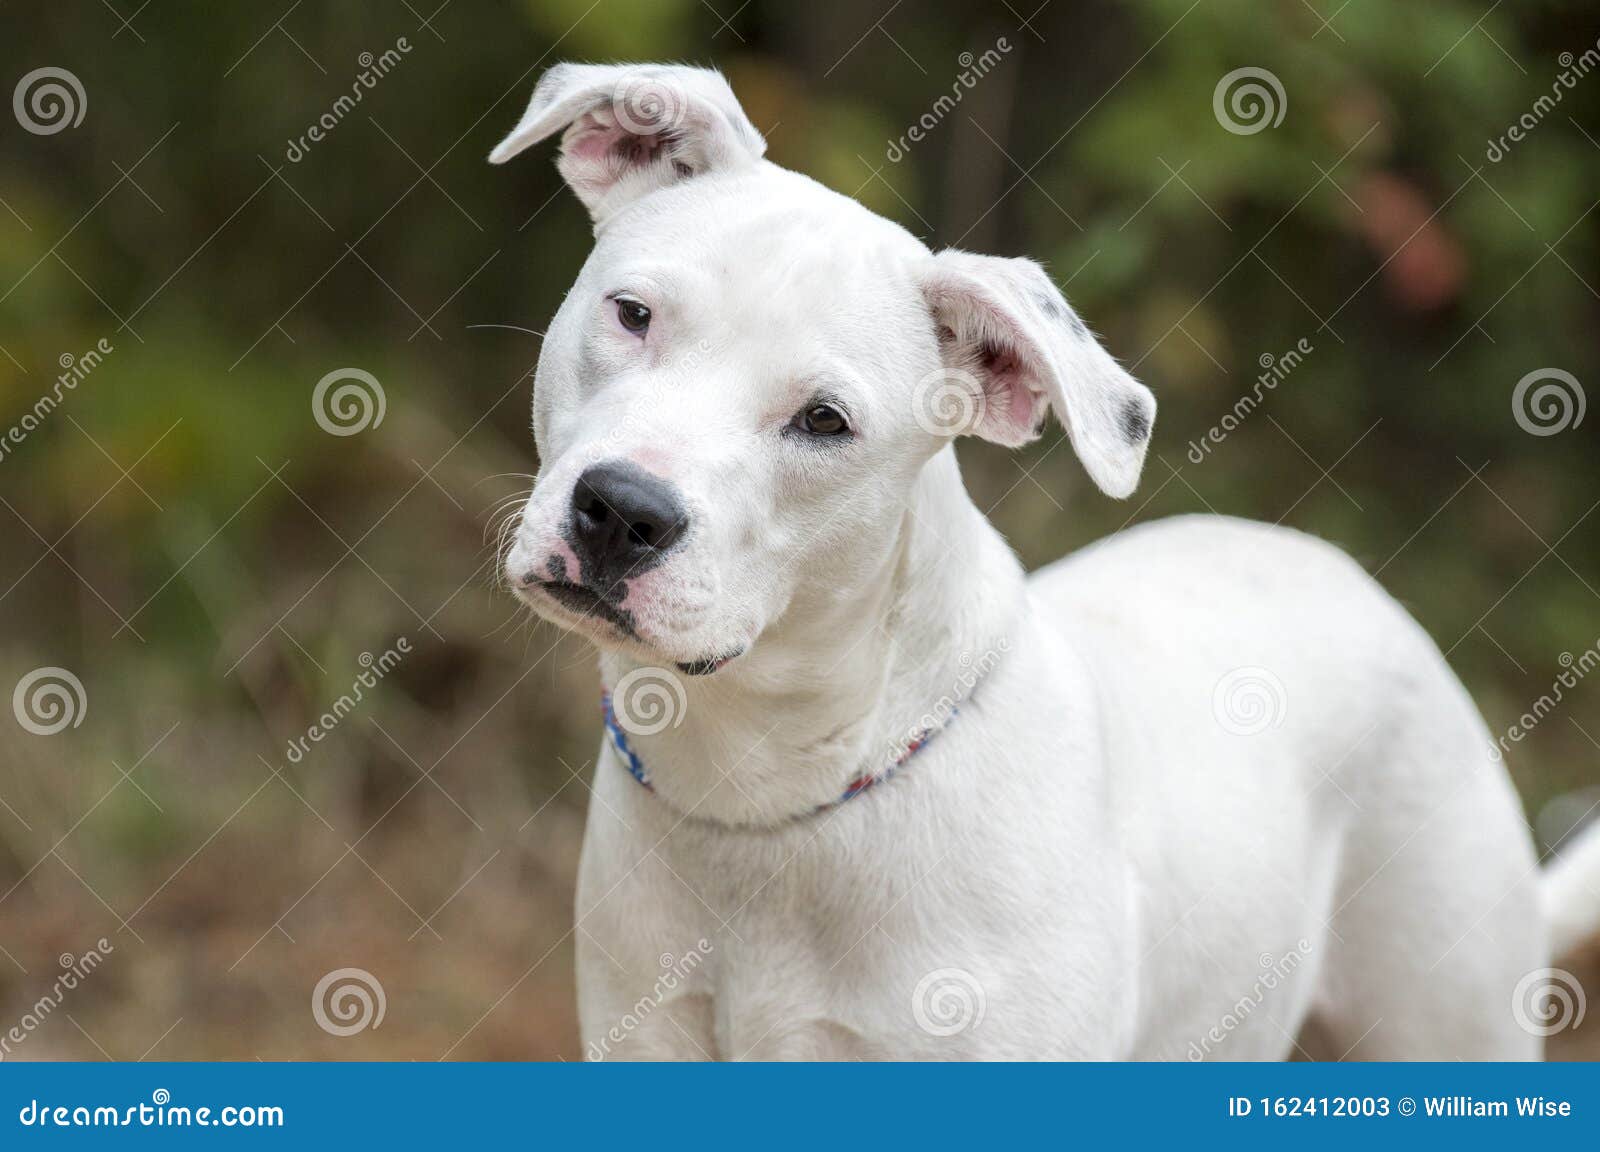 Young Cute White Pitbull Terrier Dog Curious Head Tilt Stock Image Image Of Control Head 162412003